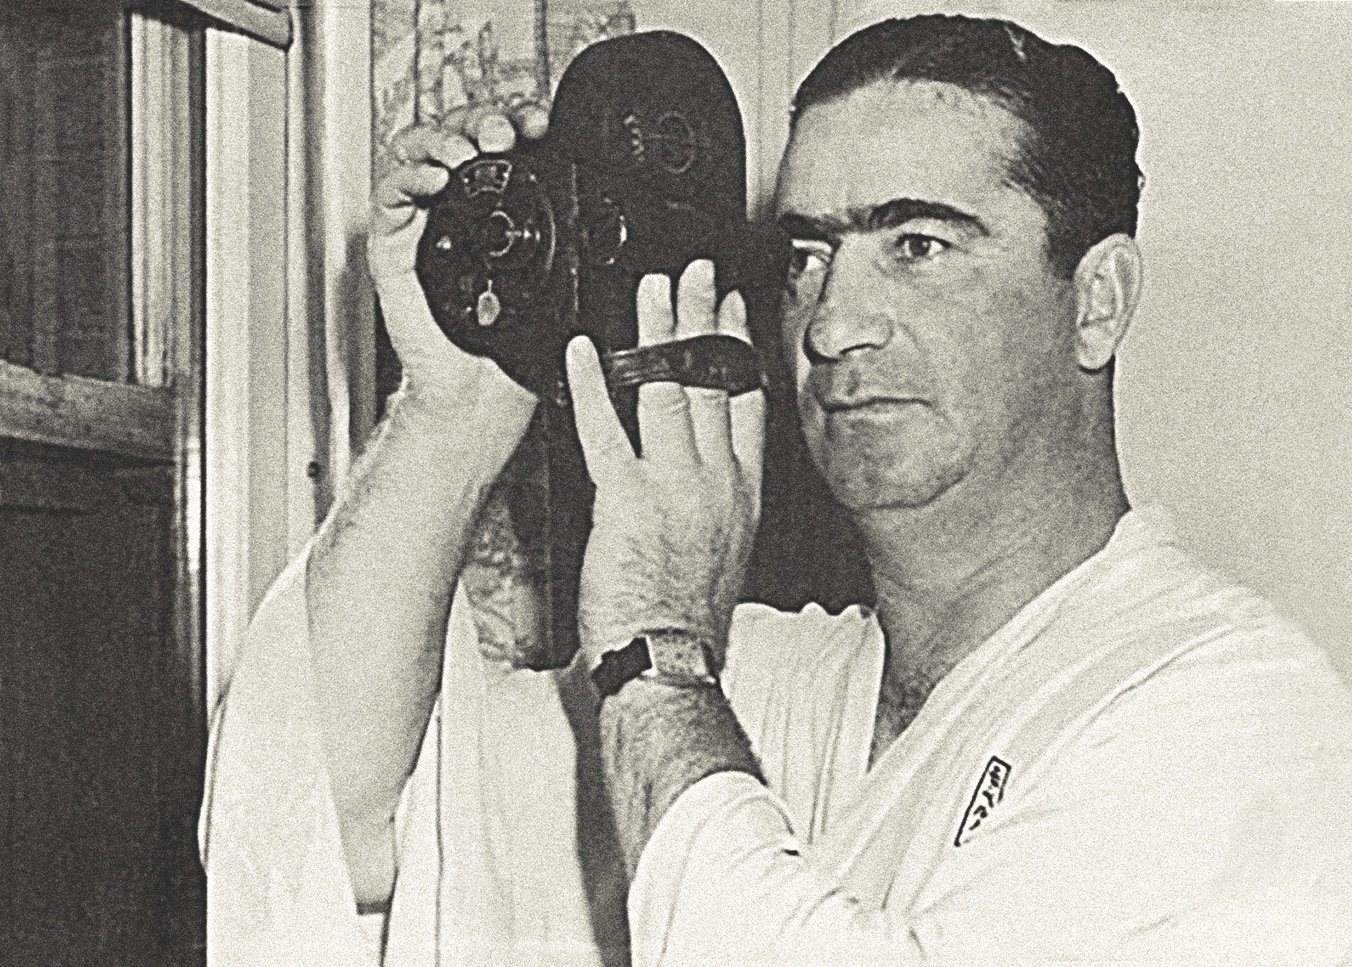 Berg with his 16mm Bell and Howell movie camera. (Arthur W. Diamond Law Library, Columbia University School of Law)